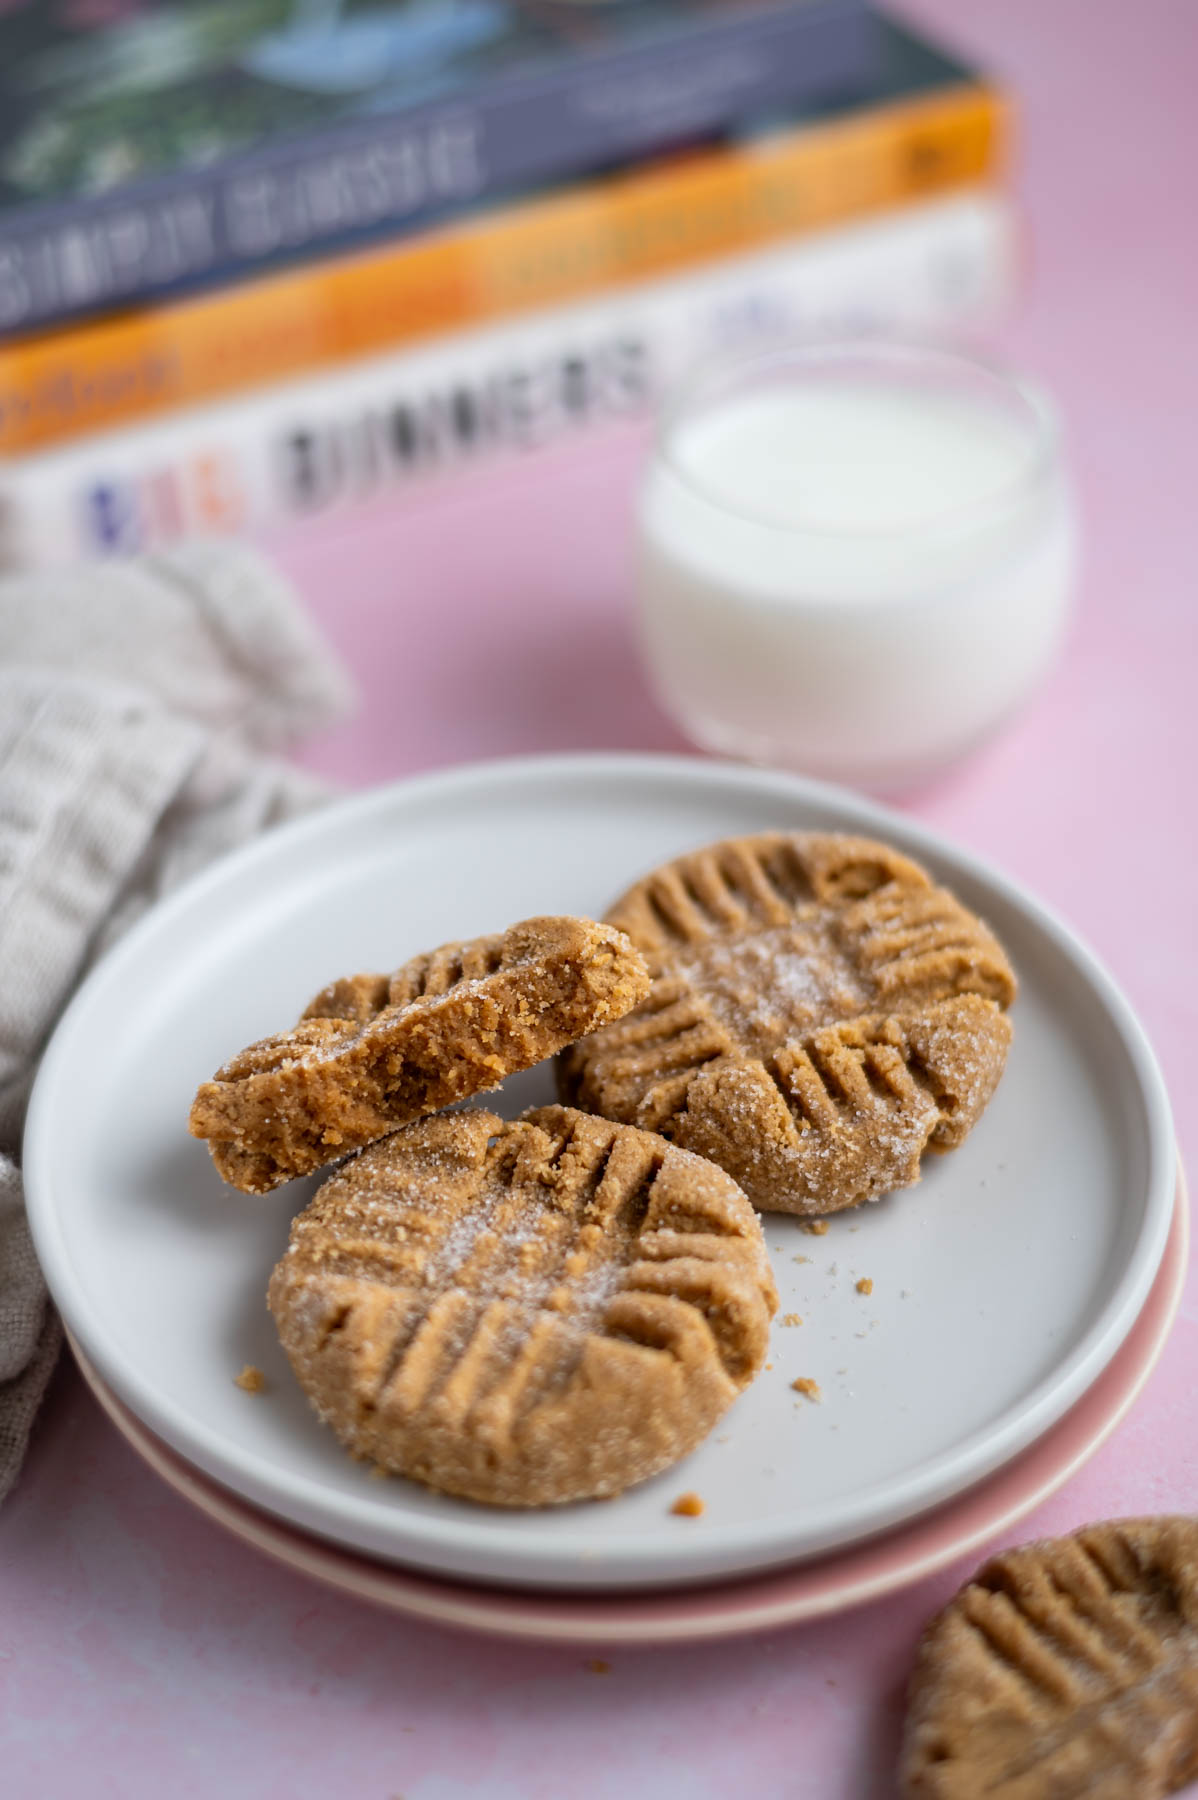 three peanut butter cookies on a plate with a glass of milk and cookbooks in the background